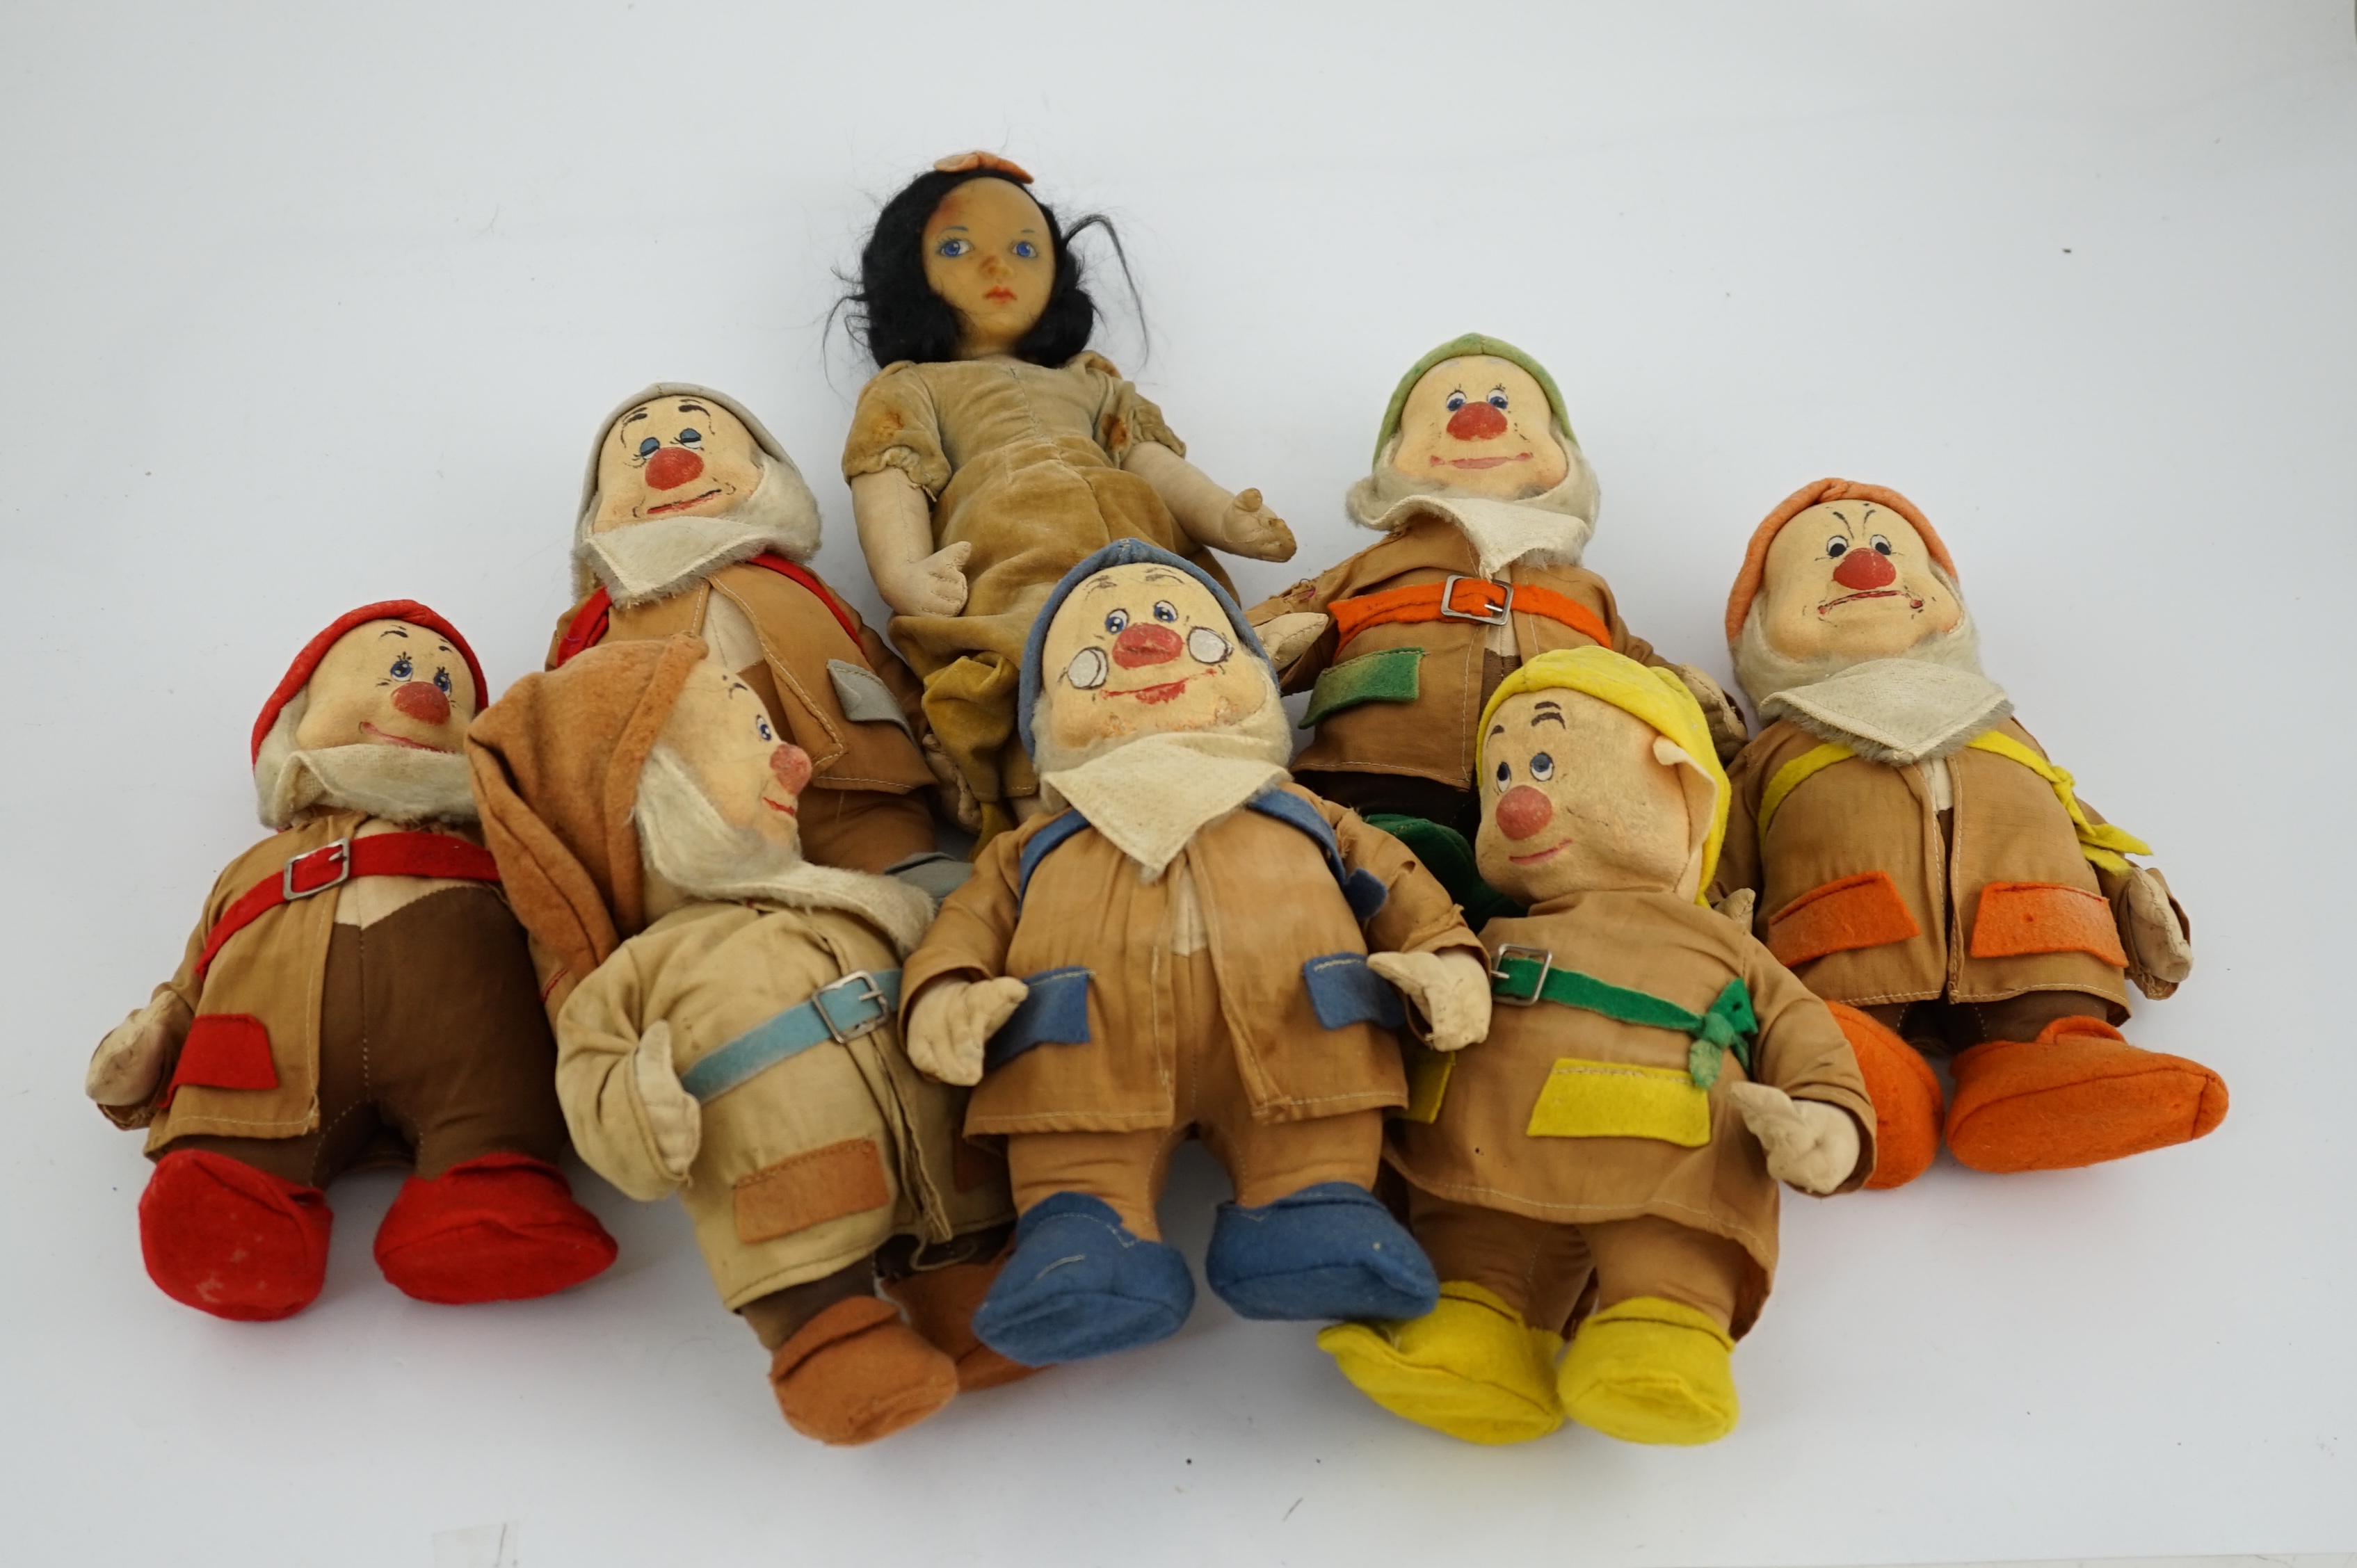 A set of Merrythought Snow White and the Seven Dwarves, Snow White with Merrythought label to the sole of her foot, the Dwarves could possibly be made by either Merrythought or Chad Valley, Snow White 36cm high